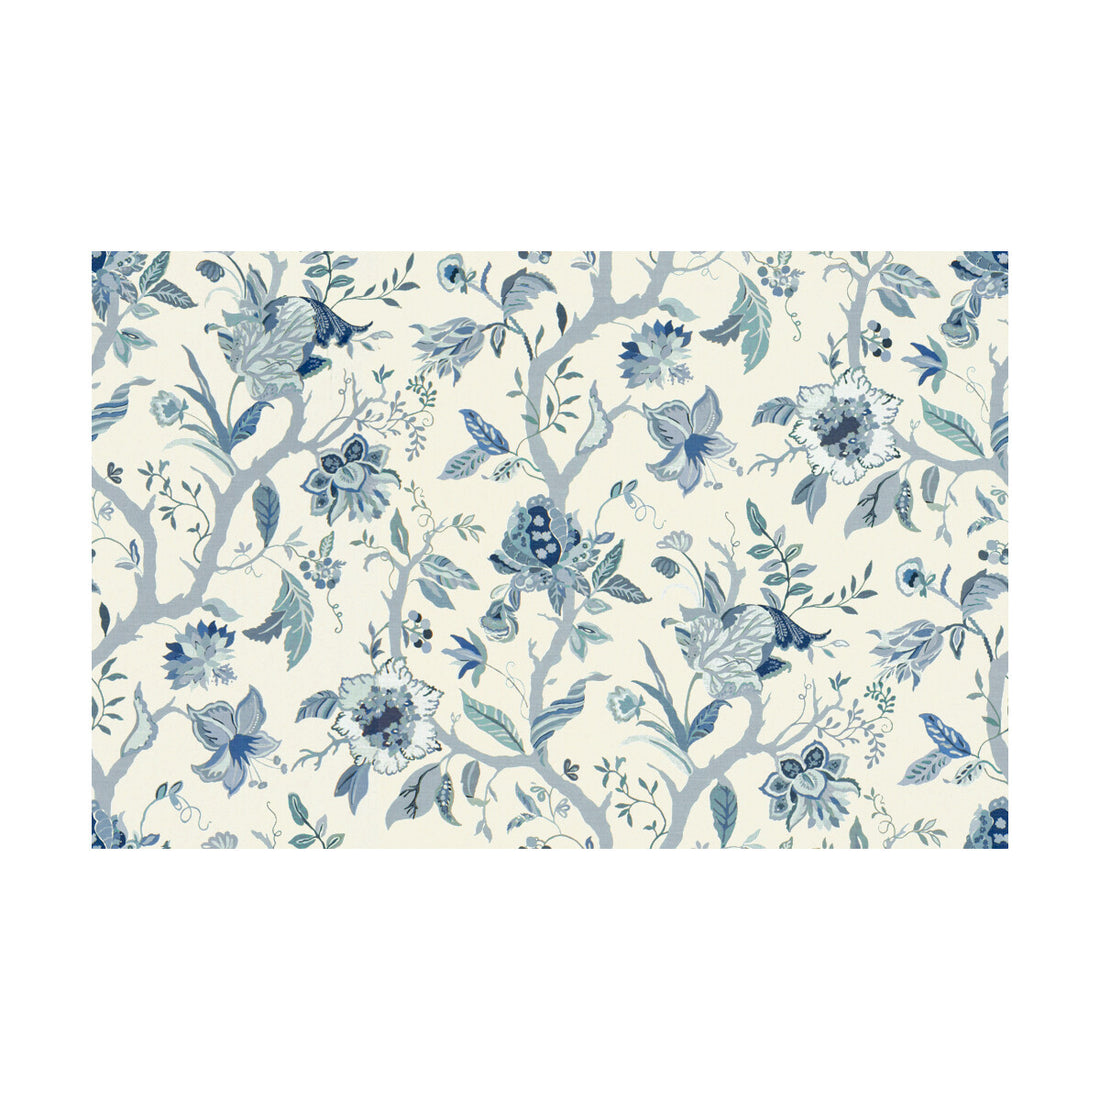 Sayre fabric in blue color - pattern 2013122.515.0 - by Lee Jofa in the Aerin collection